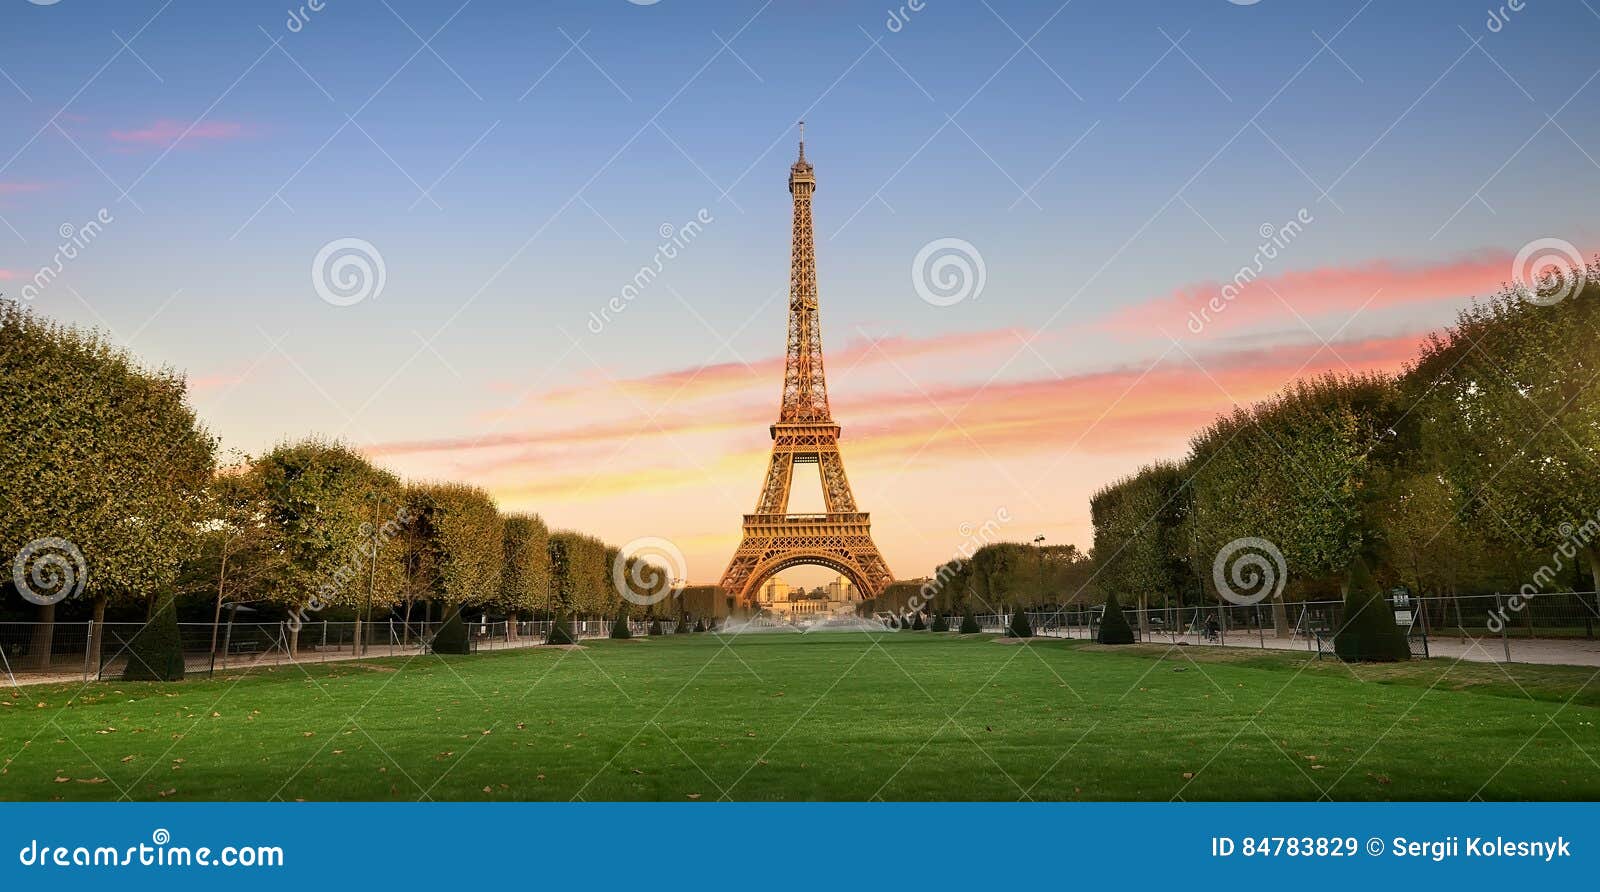 Eiffel Tower and alley stock image. Image of france, metal - 84783829